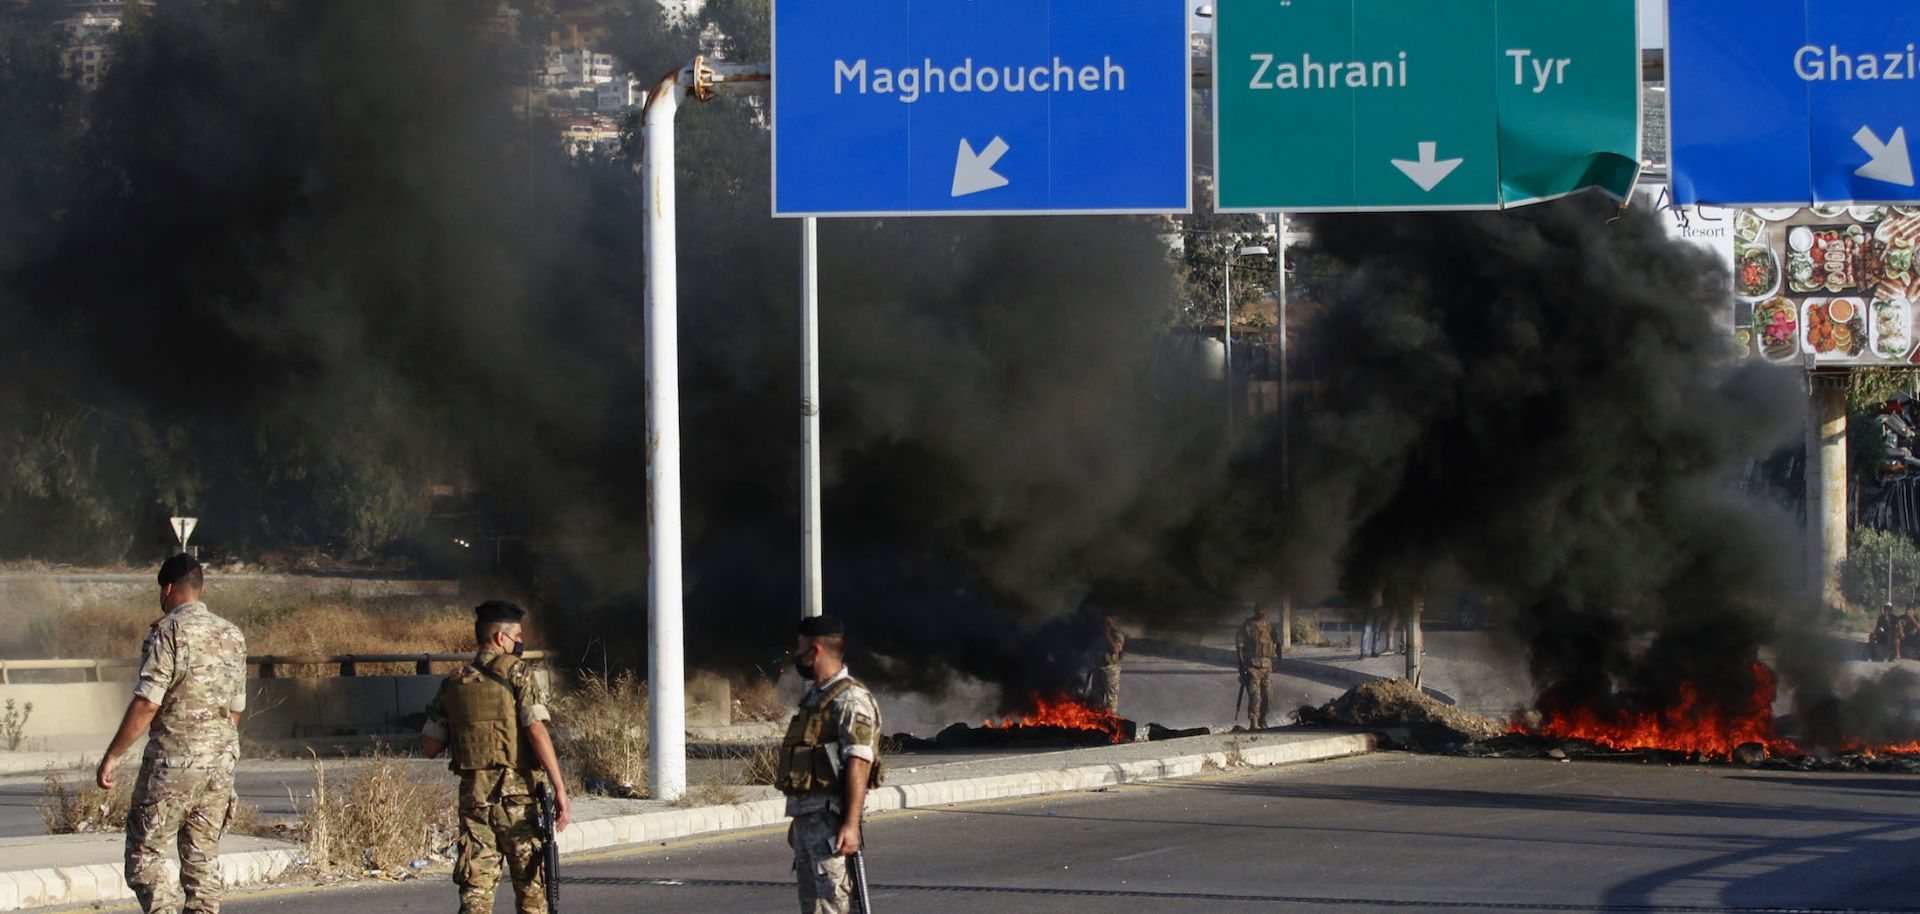 Soldiers in the southern Lebanese coastal town of Ghazieh on June 12, 2020, amid demonstrations that erupted after the sharp drop of the Lebanese pound on the black market.